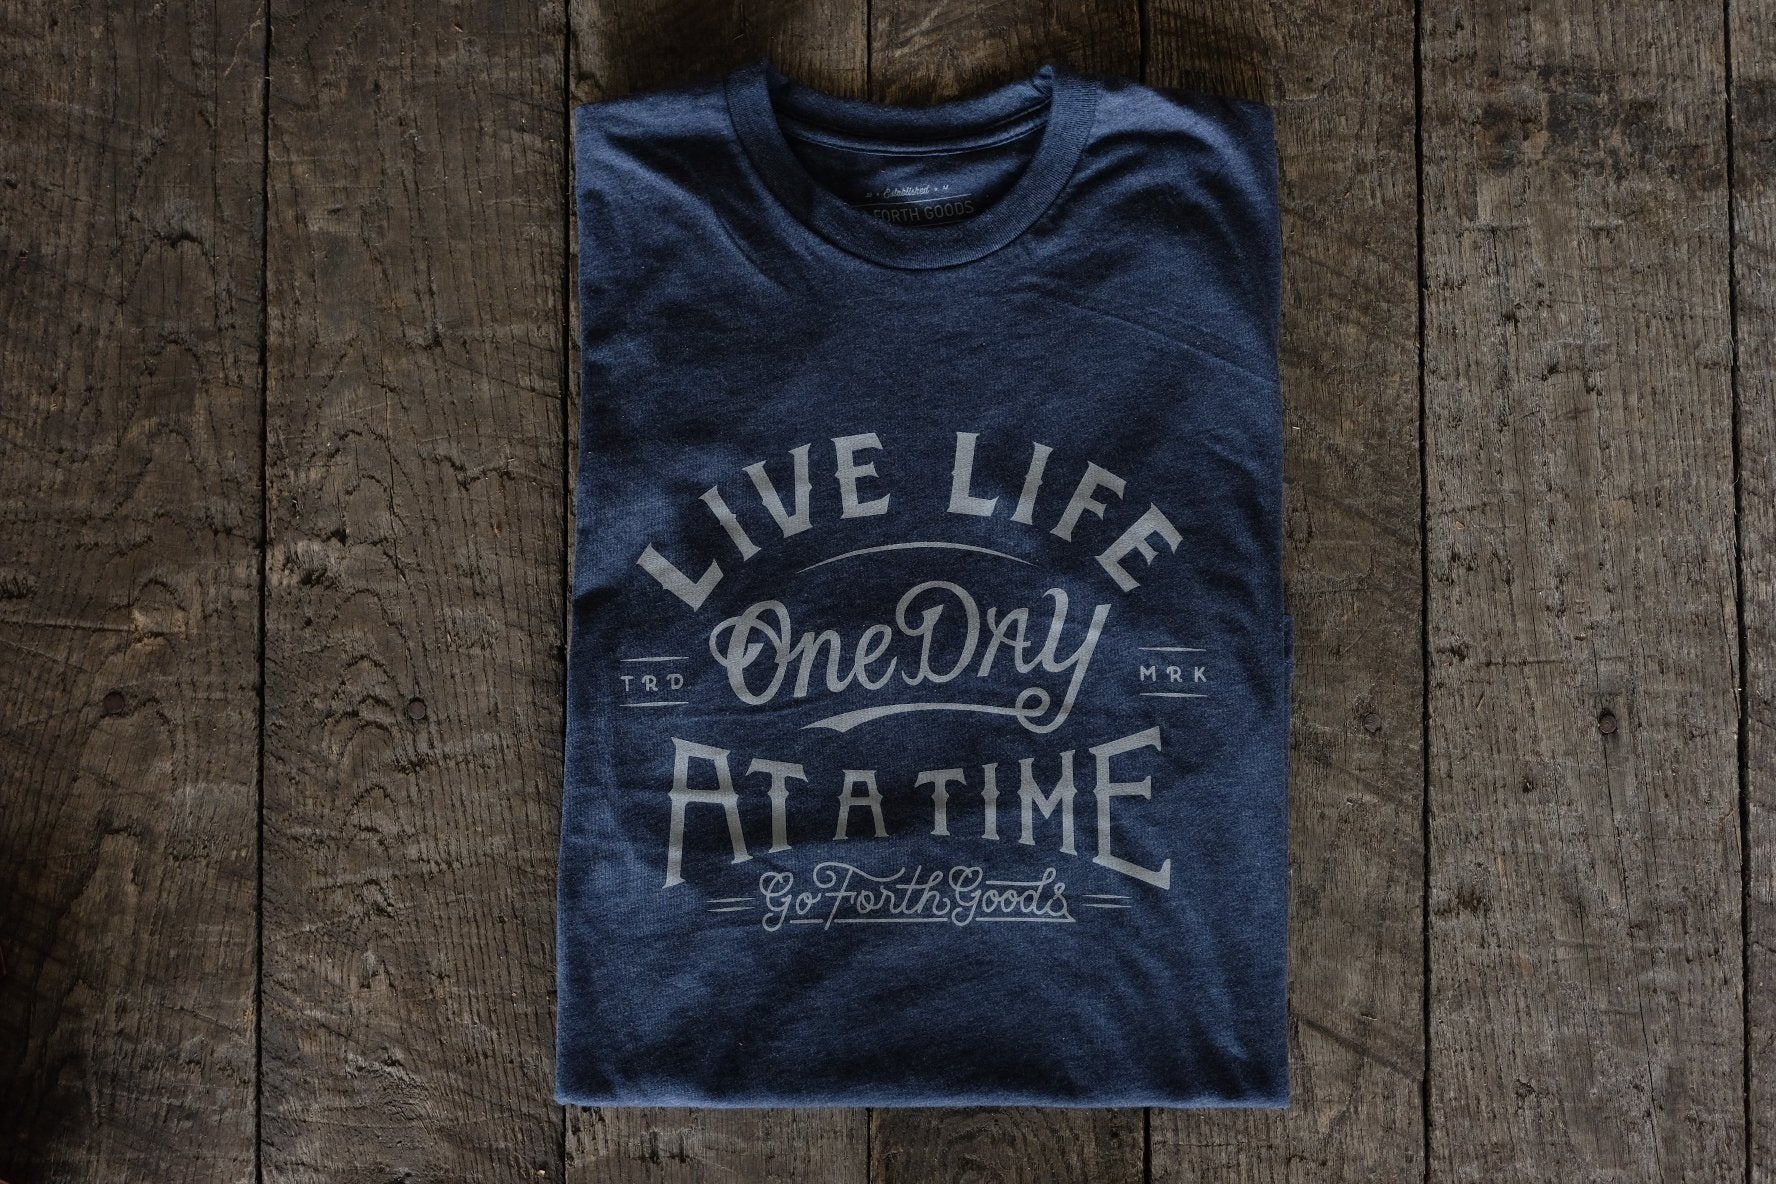 LIVE LIFE ONE DAY AT A TIME T-SHIRT